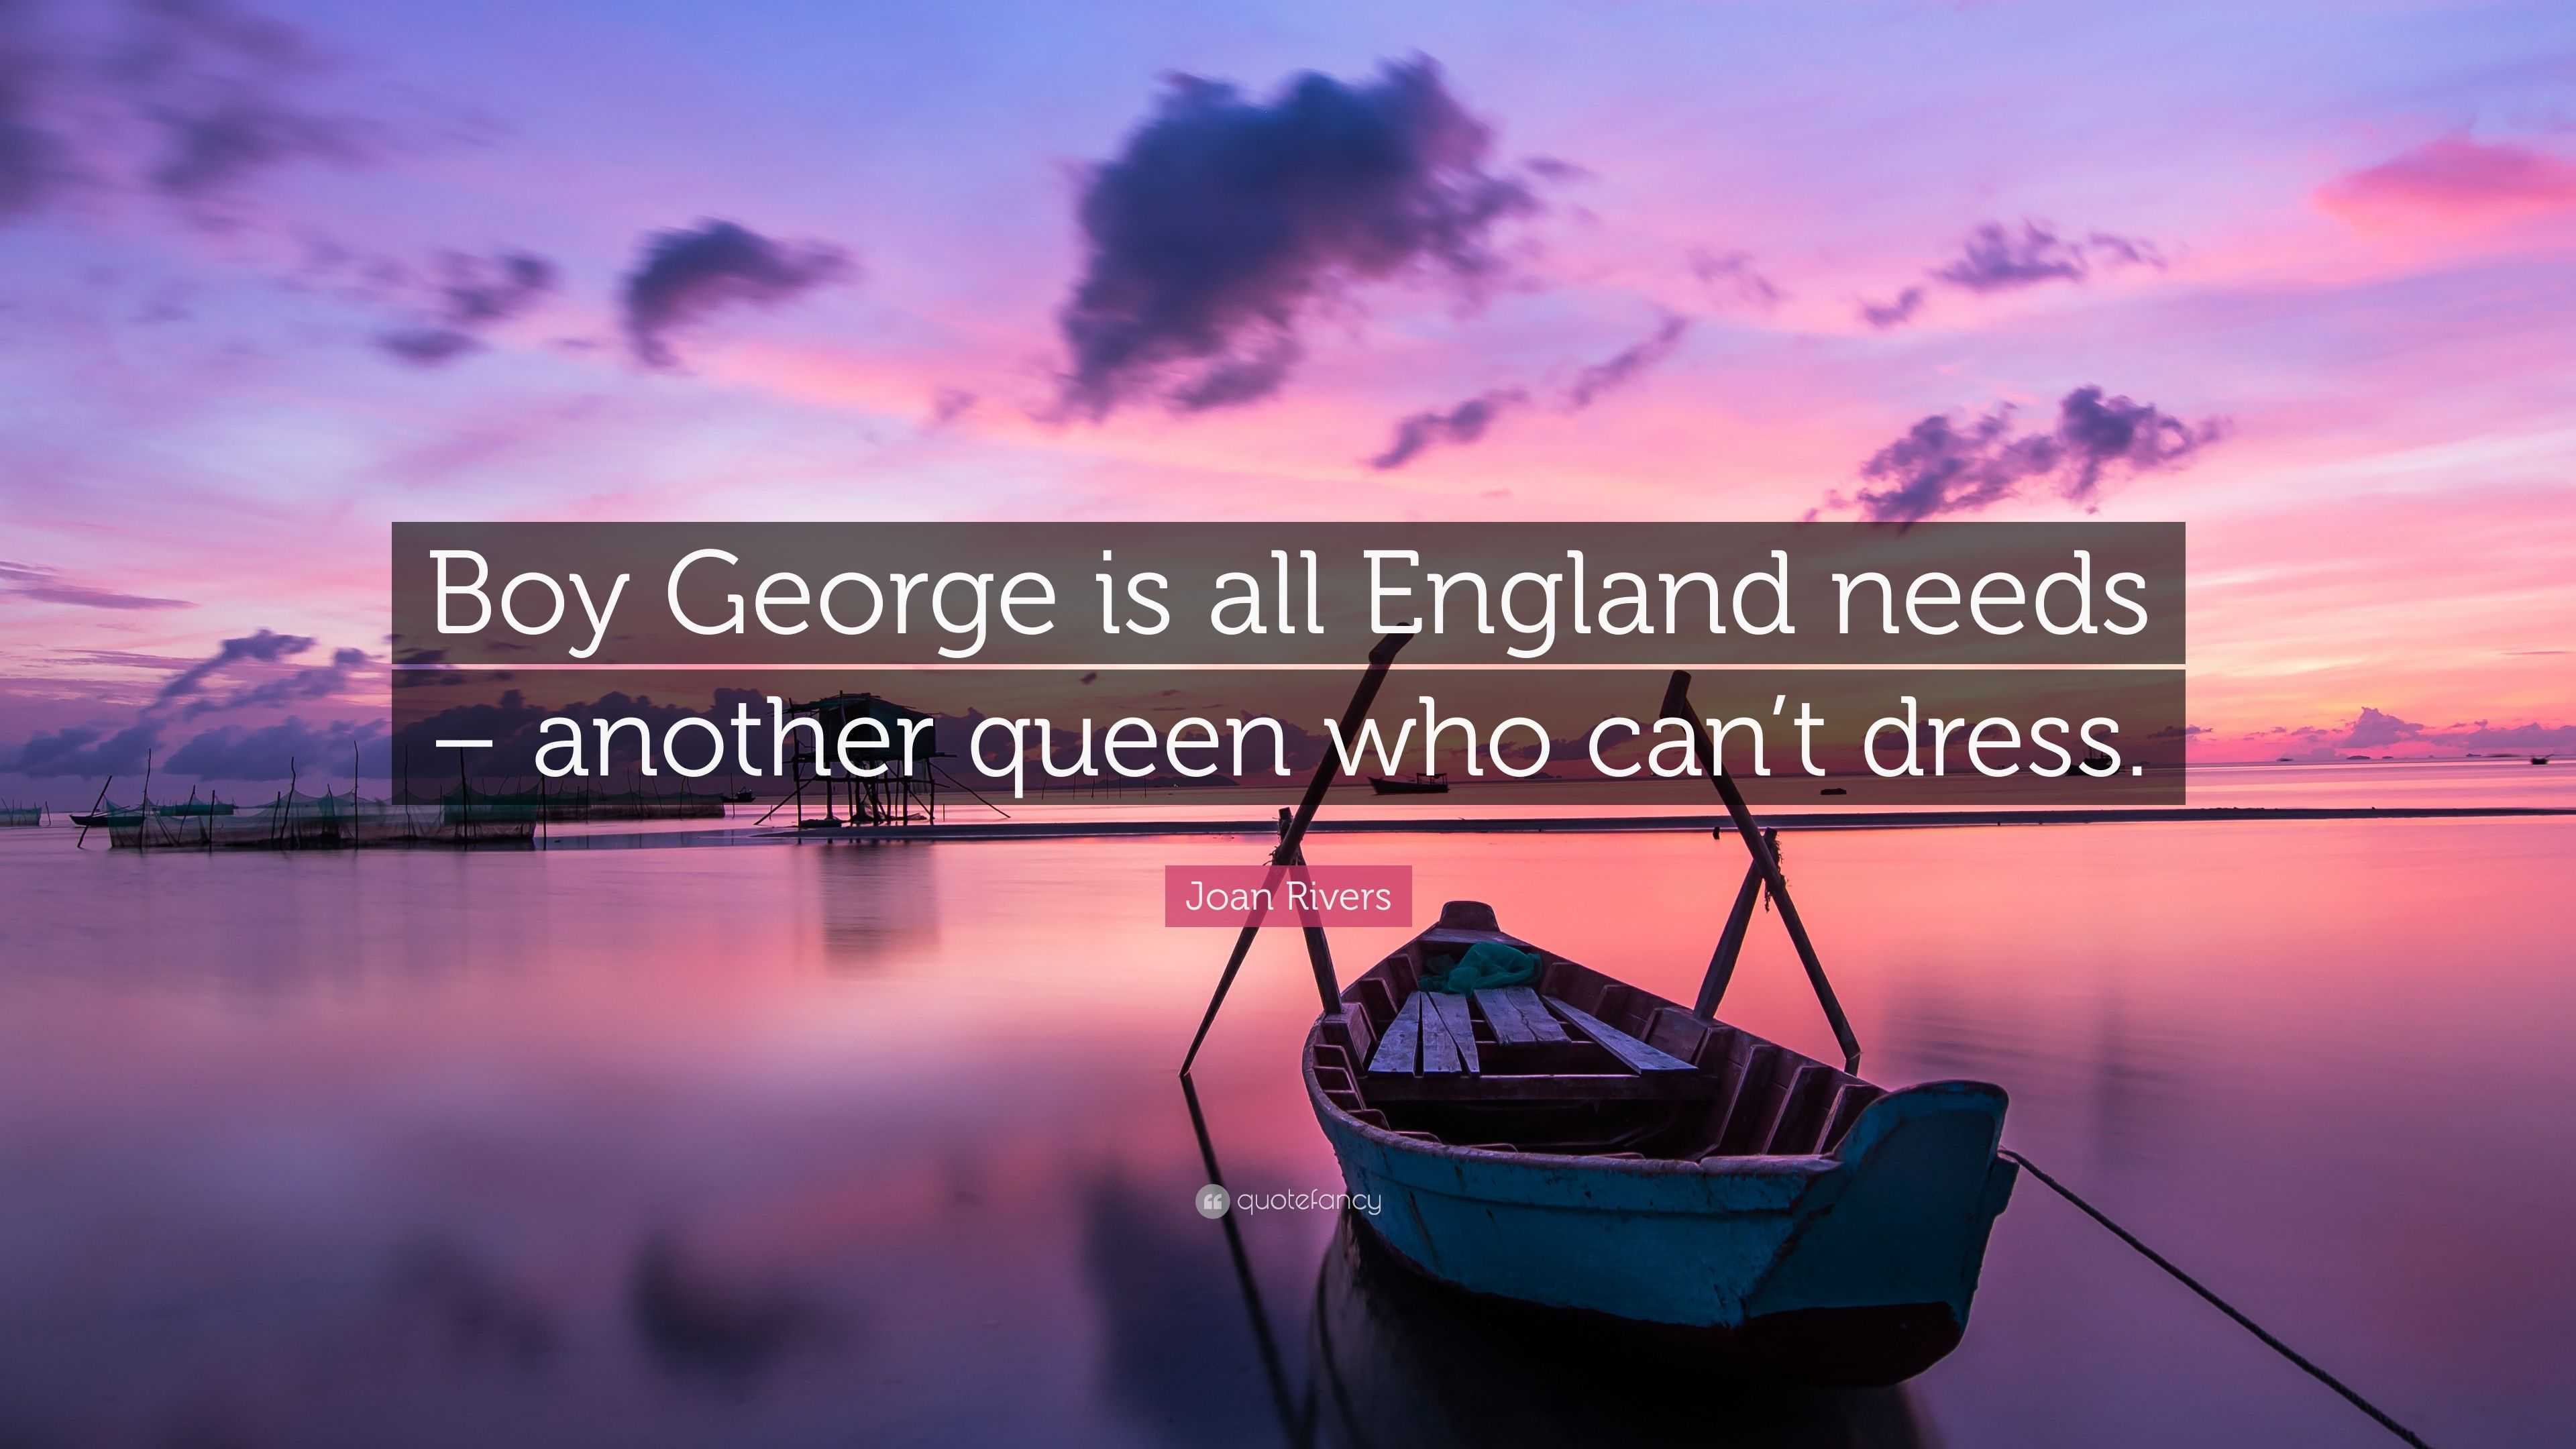 Joan Rivers can\'t queen is – England needs Quote: all “Boy another who George